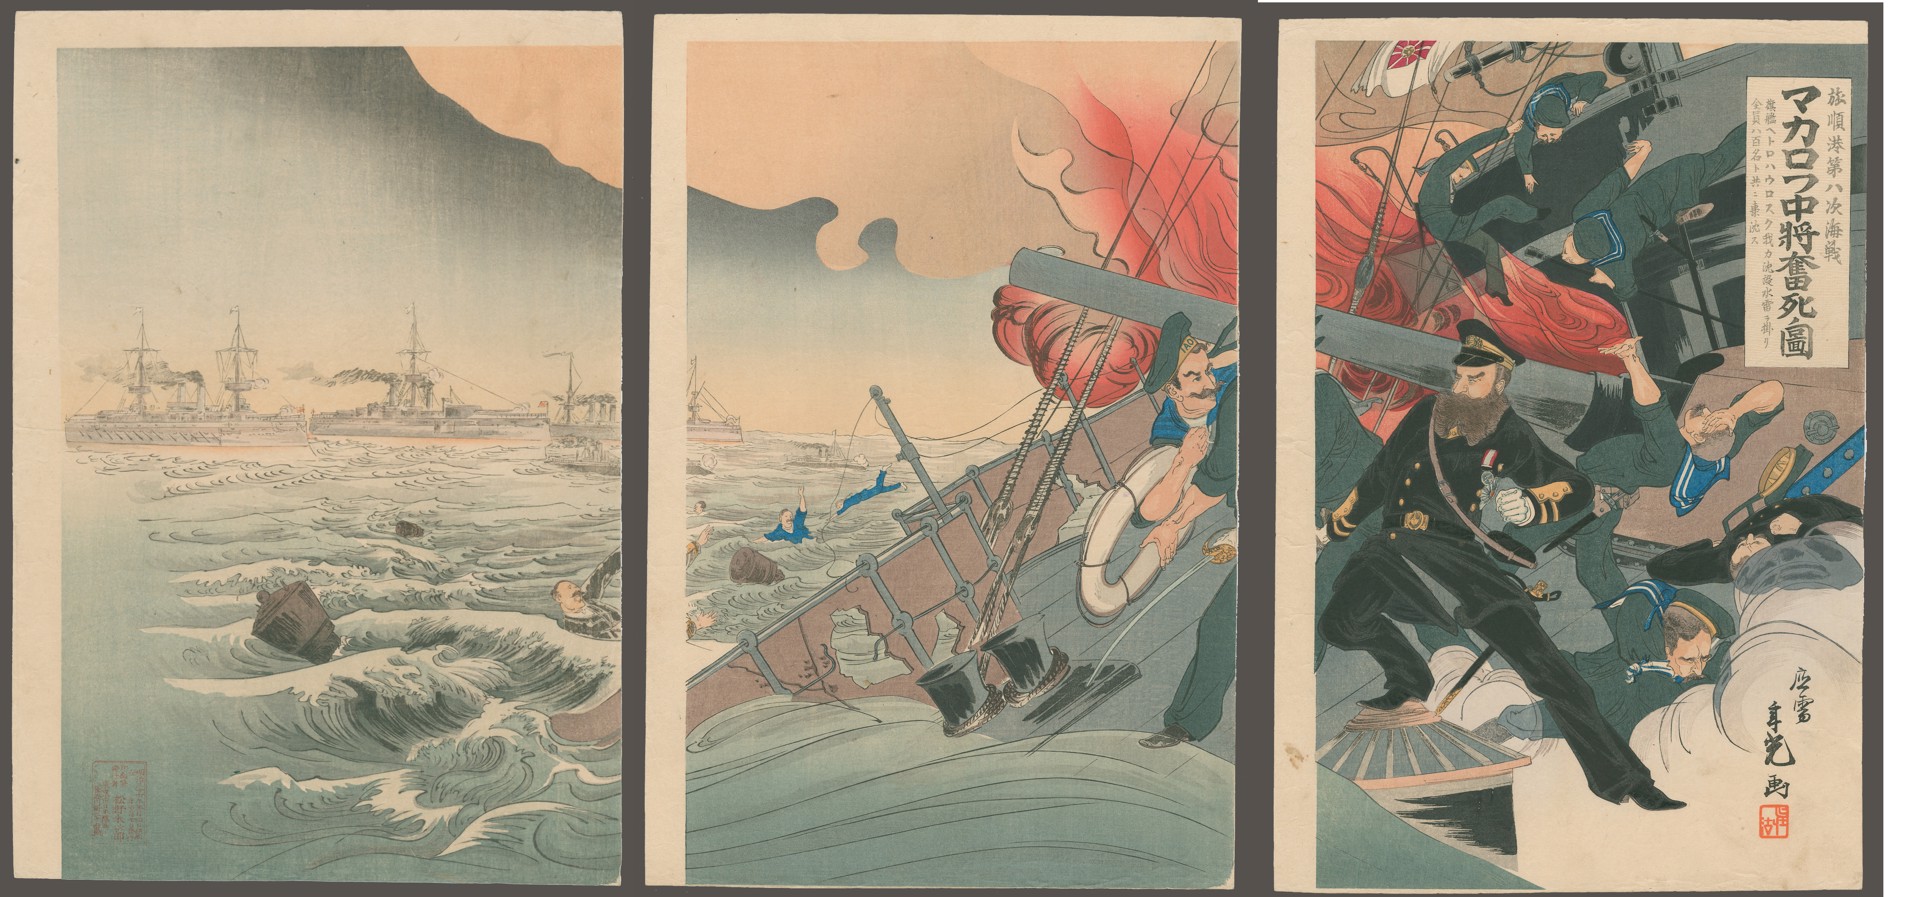 Vice Admiral Maraken Stirred Up by the Deaths of his Crew Russo - Japanese War by Toshimitsu